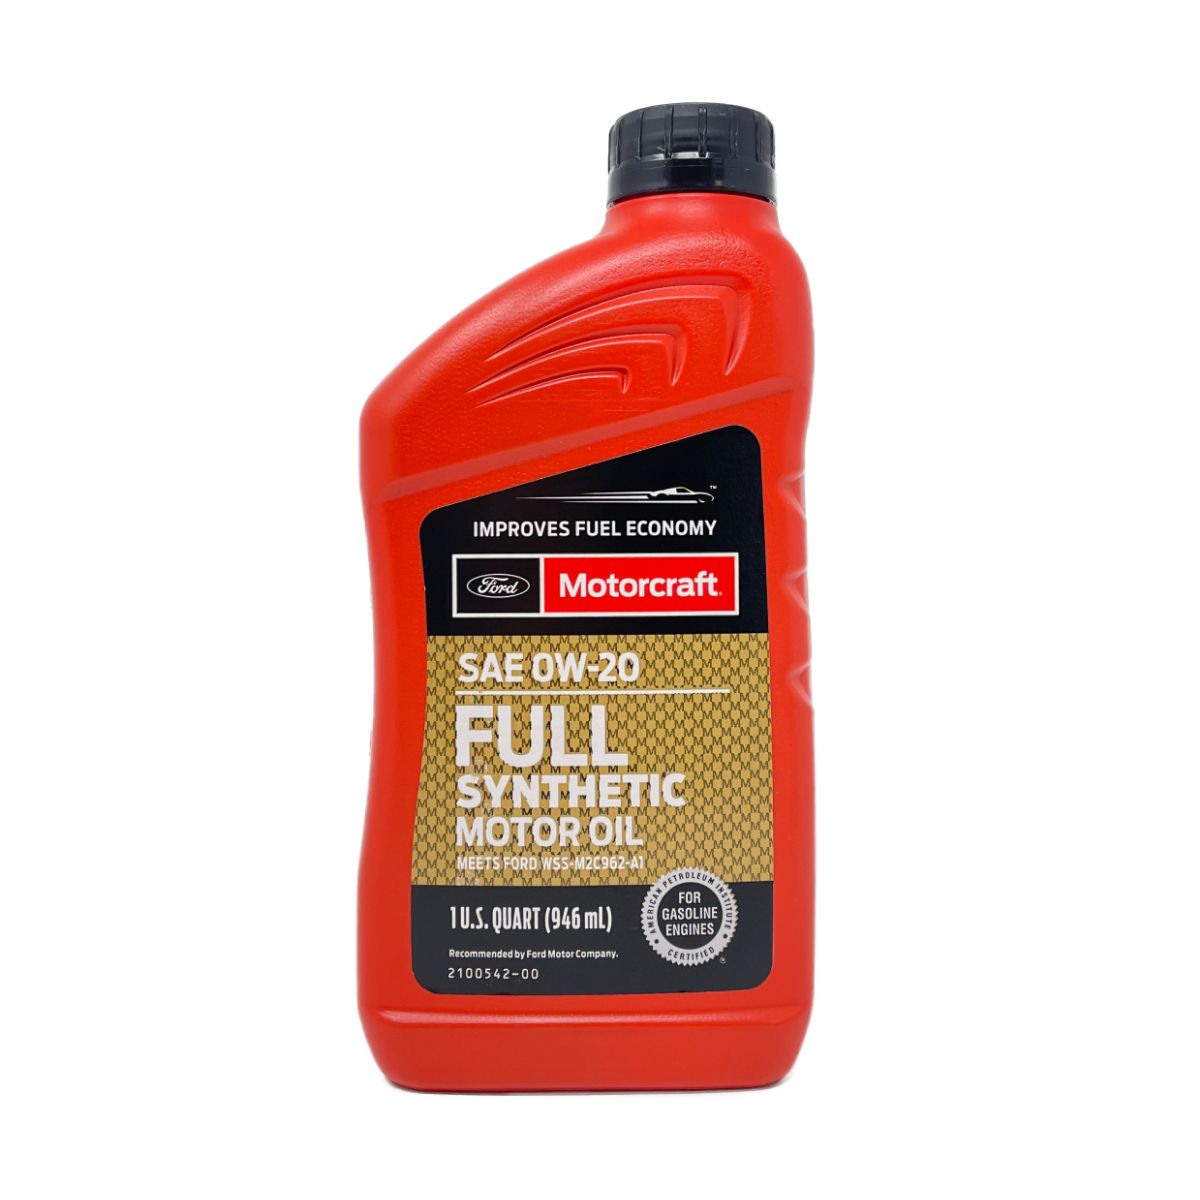 Motorcraft 0W-20 Full Synthetic 0,946 L bei ATO24 ❗